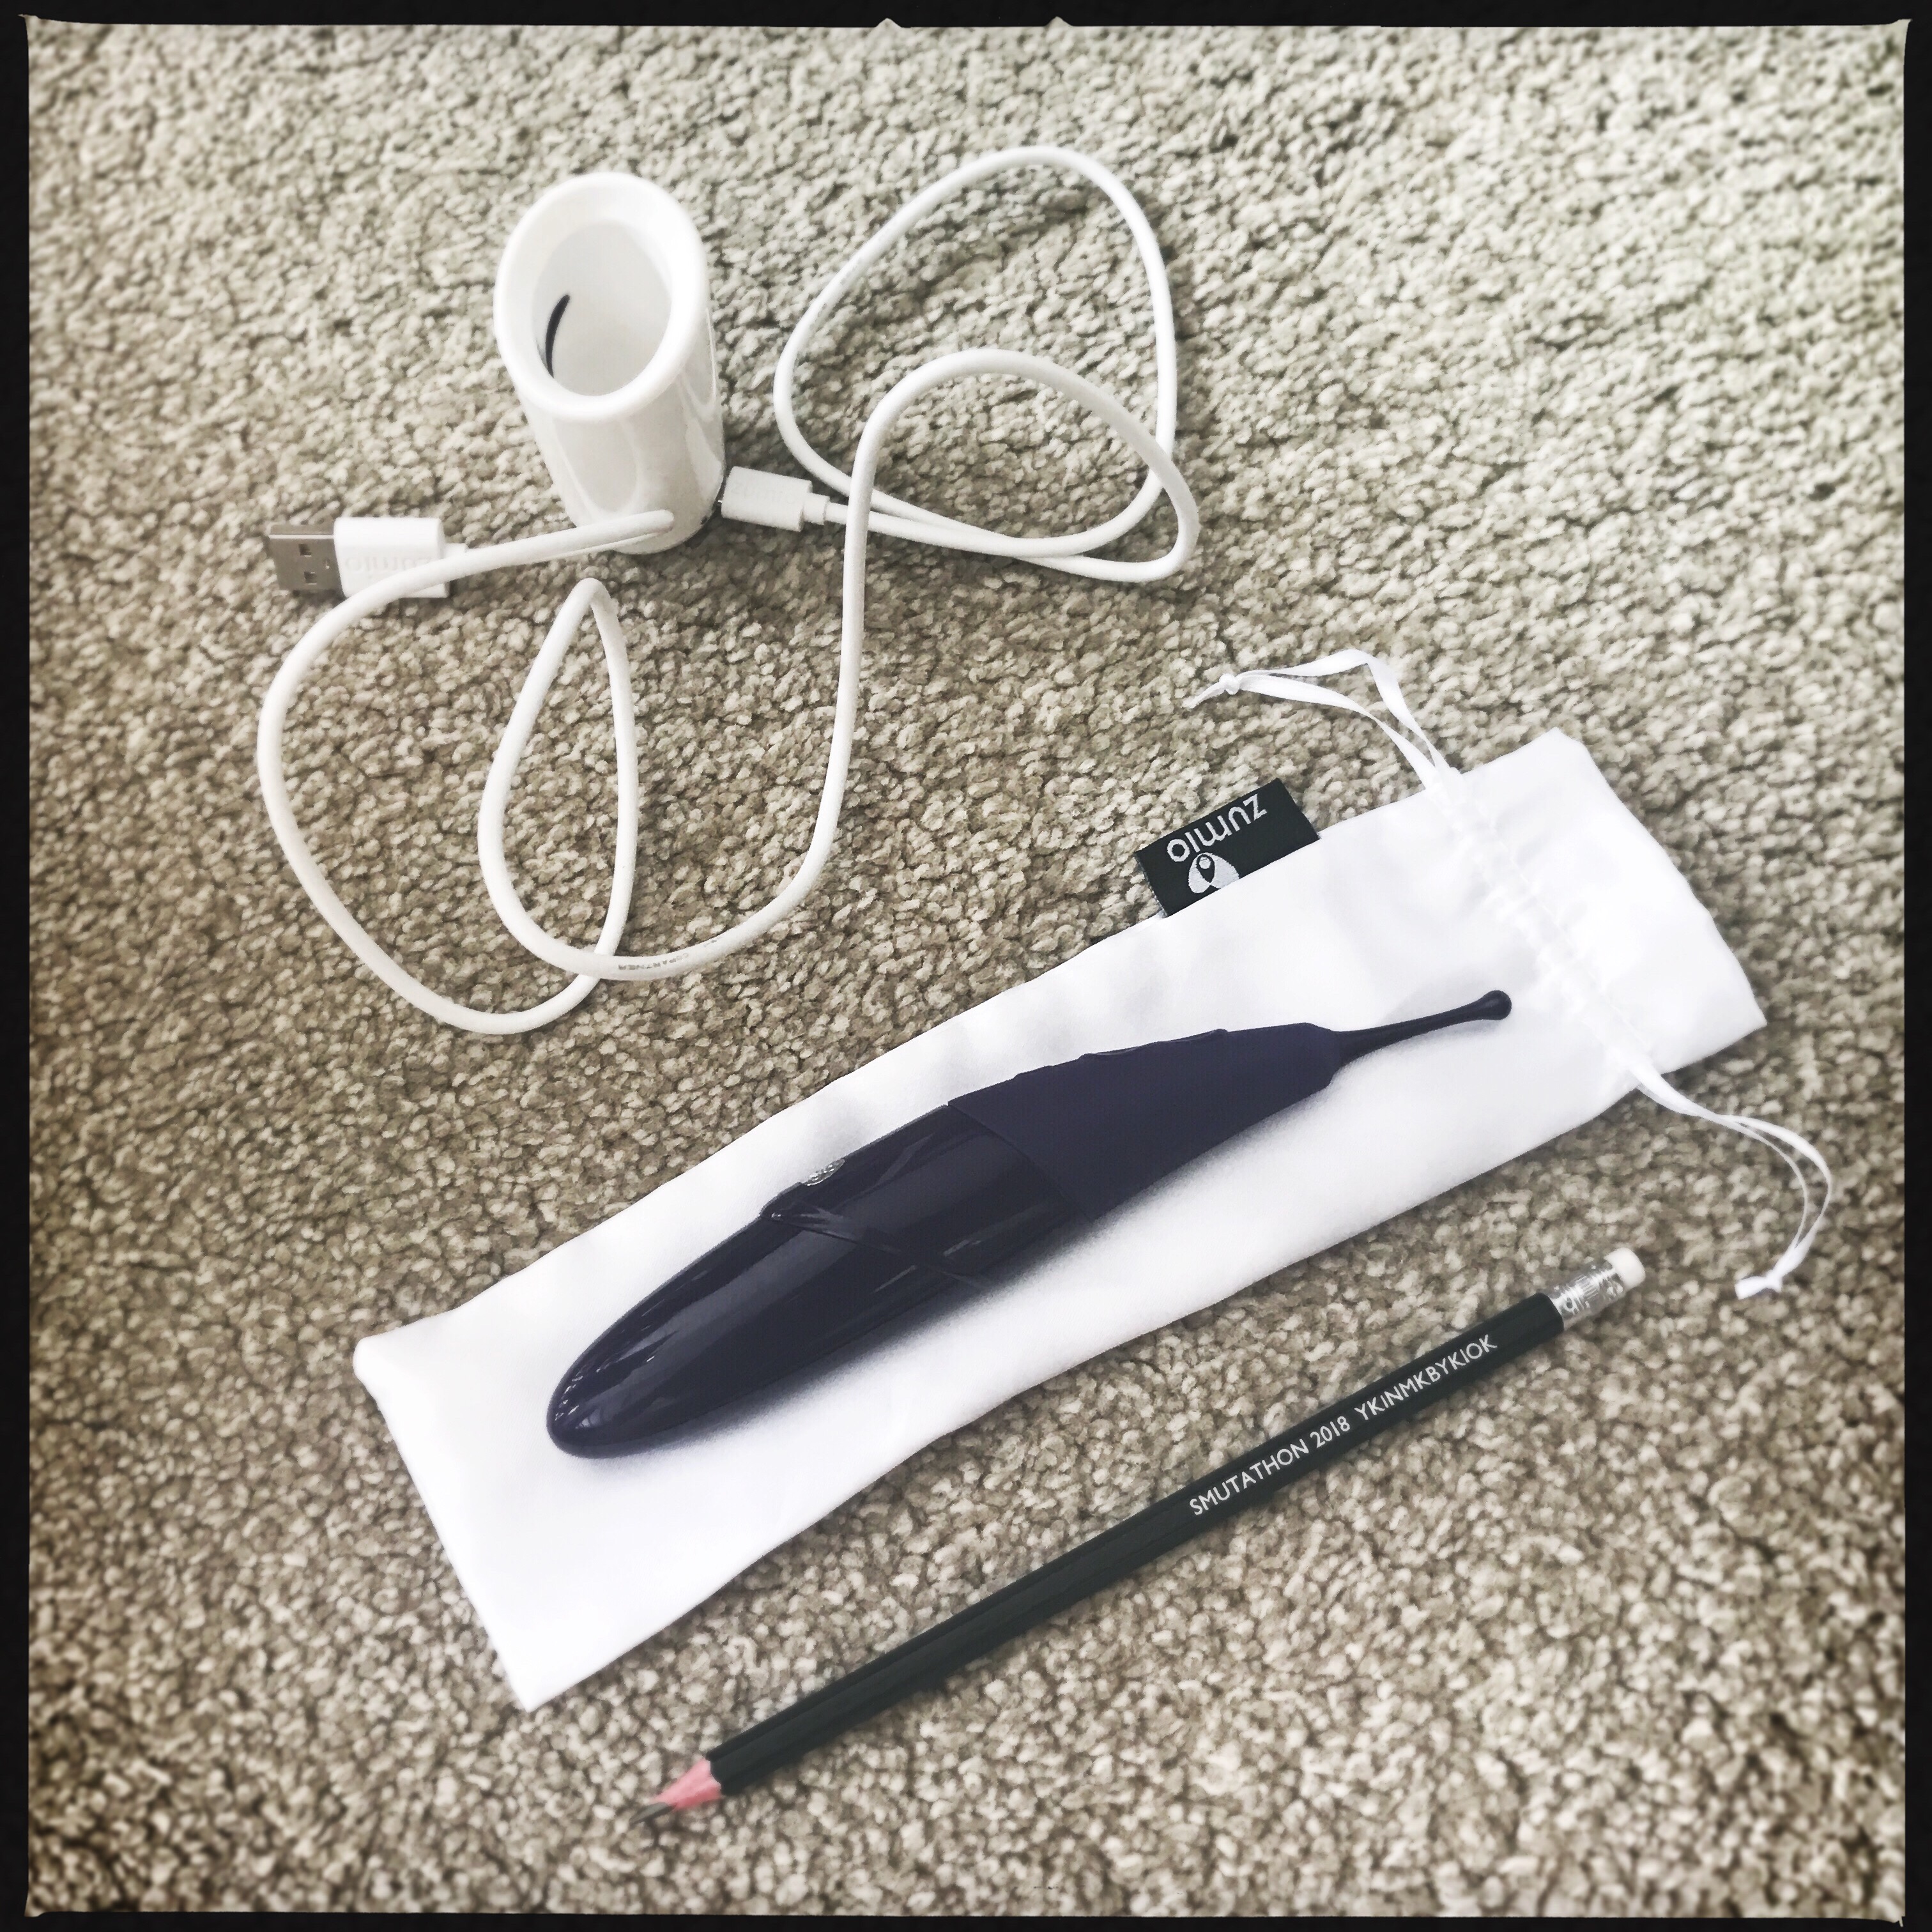 A photo showing that the Zumio sex toy is about the length of a pencil. It is lying on its white fabric case with that charging station and cable next to it